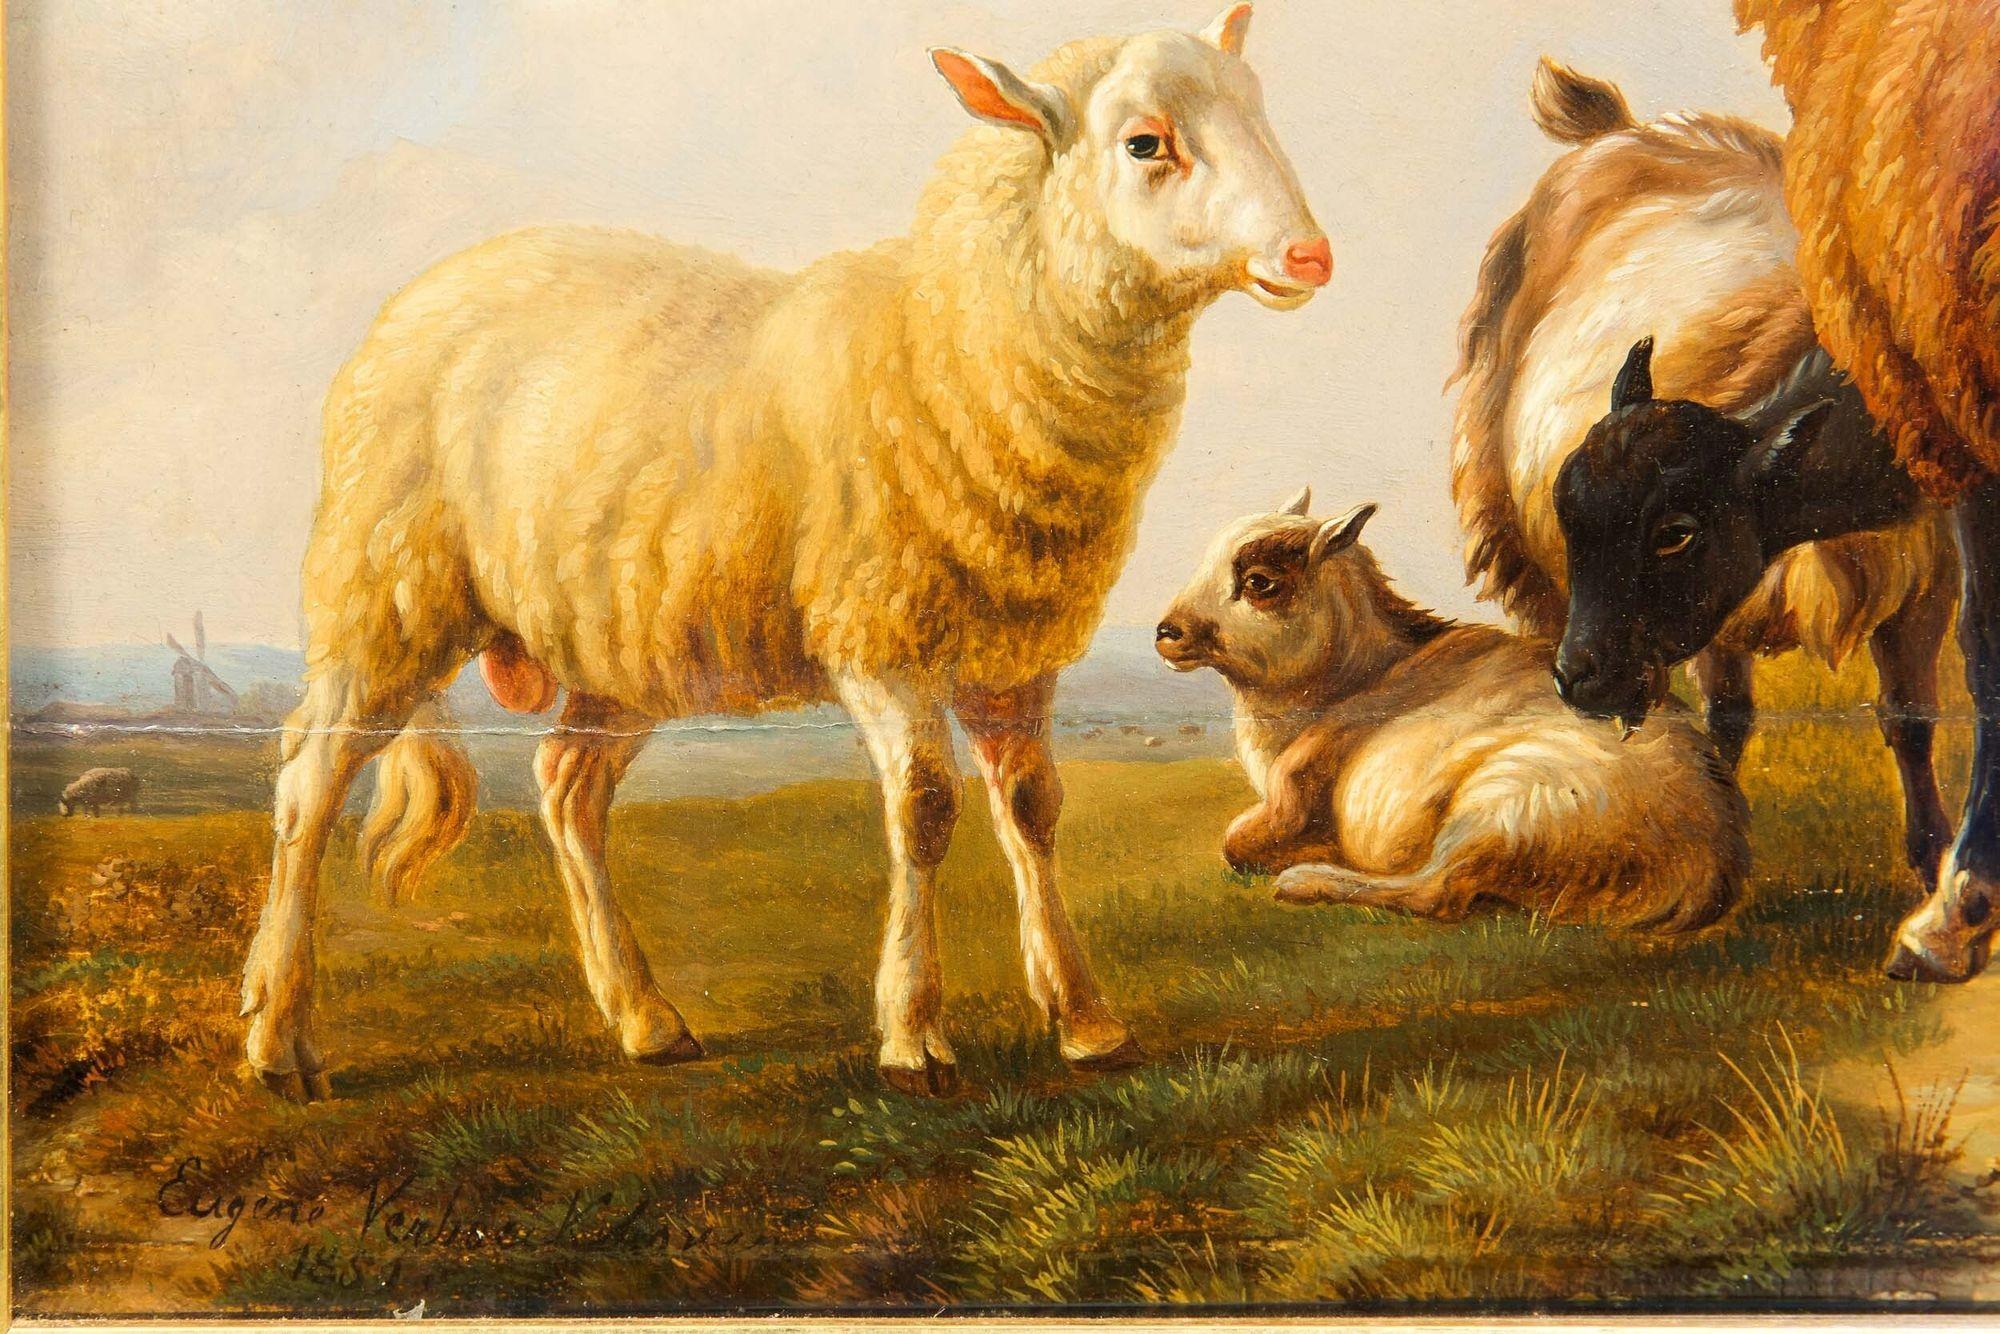 Antique Landscape “Sheep and Goats” by Eugene Verboeckhoven circa 1859 In Good Condition For Sale In Shippensburg, PA